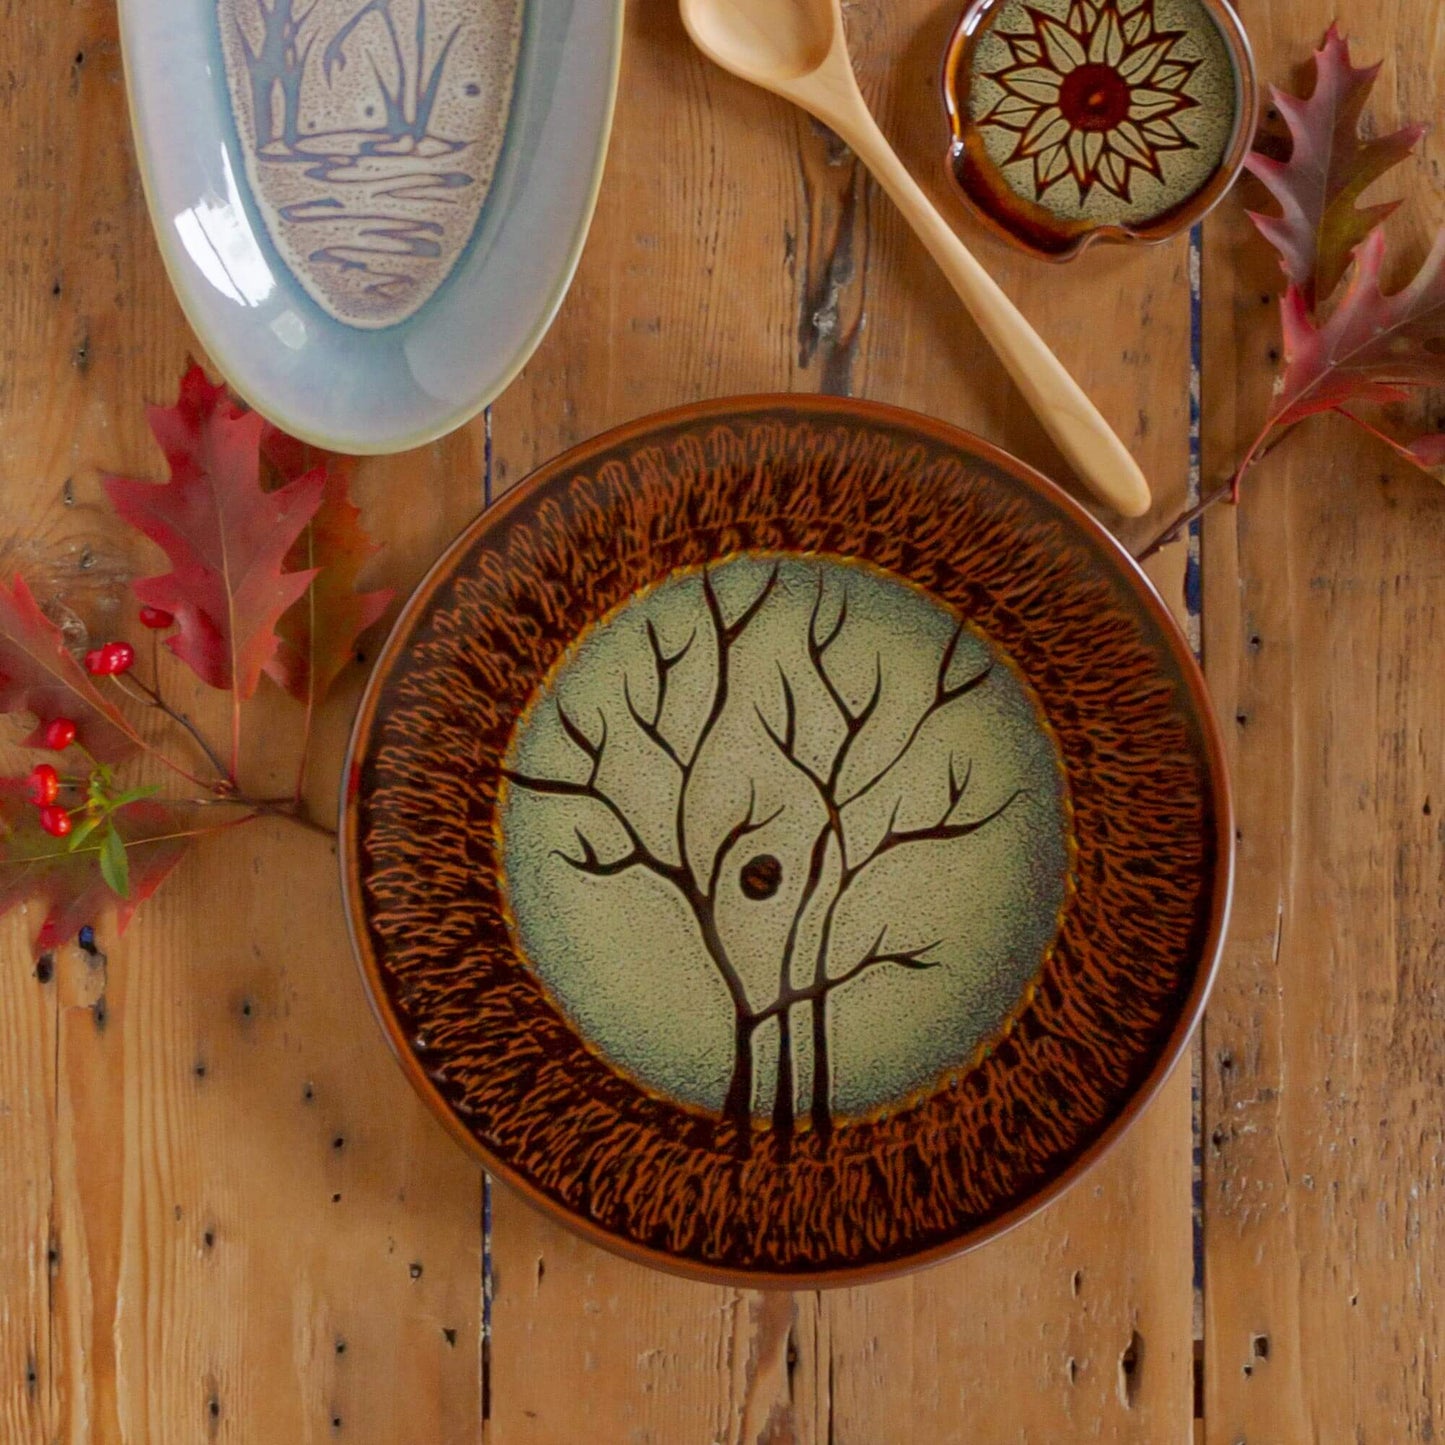 Handmade Pottery 14" Round Platter in Hamada Tree pattern made by Georgetown Pottery in Maine